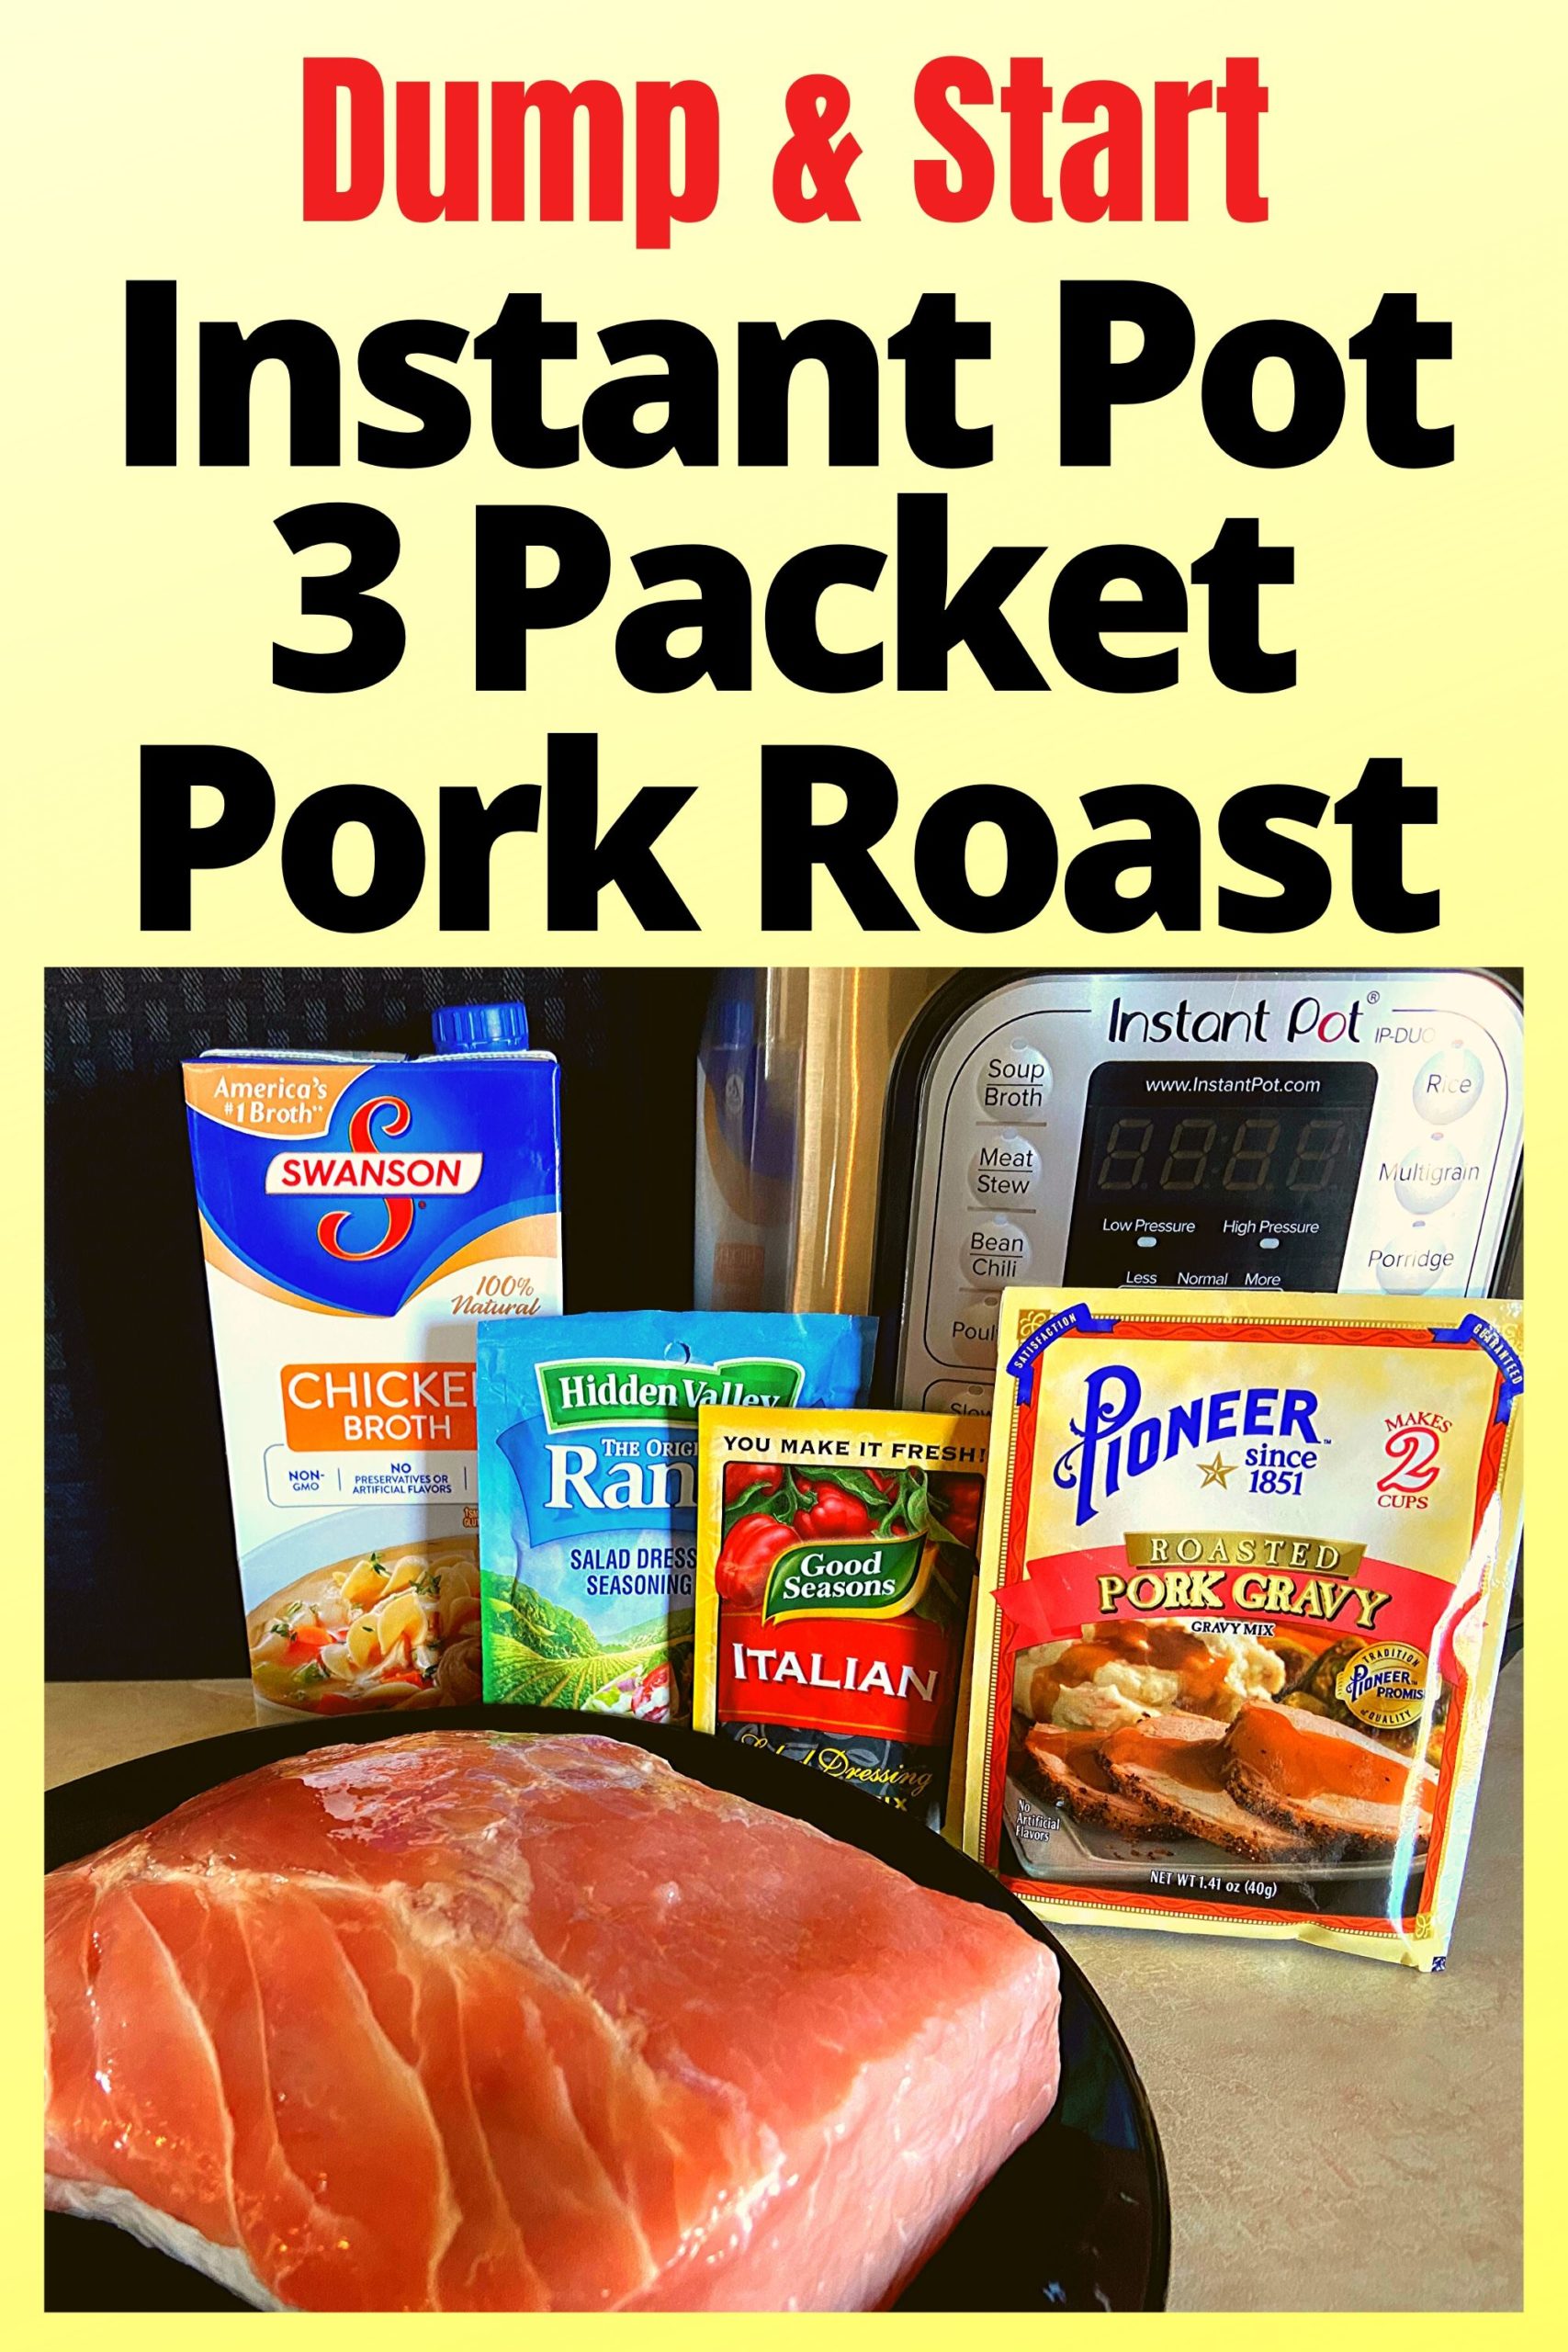 A raw pork roast on a black plate surrounded by ranch dressing packet (dry mix), Italian dressing packet (dry mix), pork gravy packet (dry mix), container of chicken broth, and an Instant Pot all sitting on a kitchen counter.